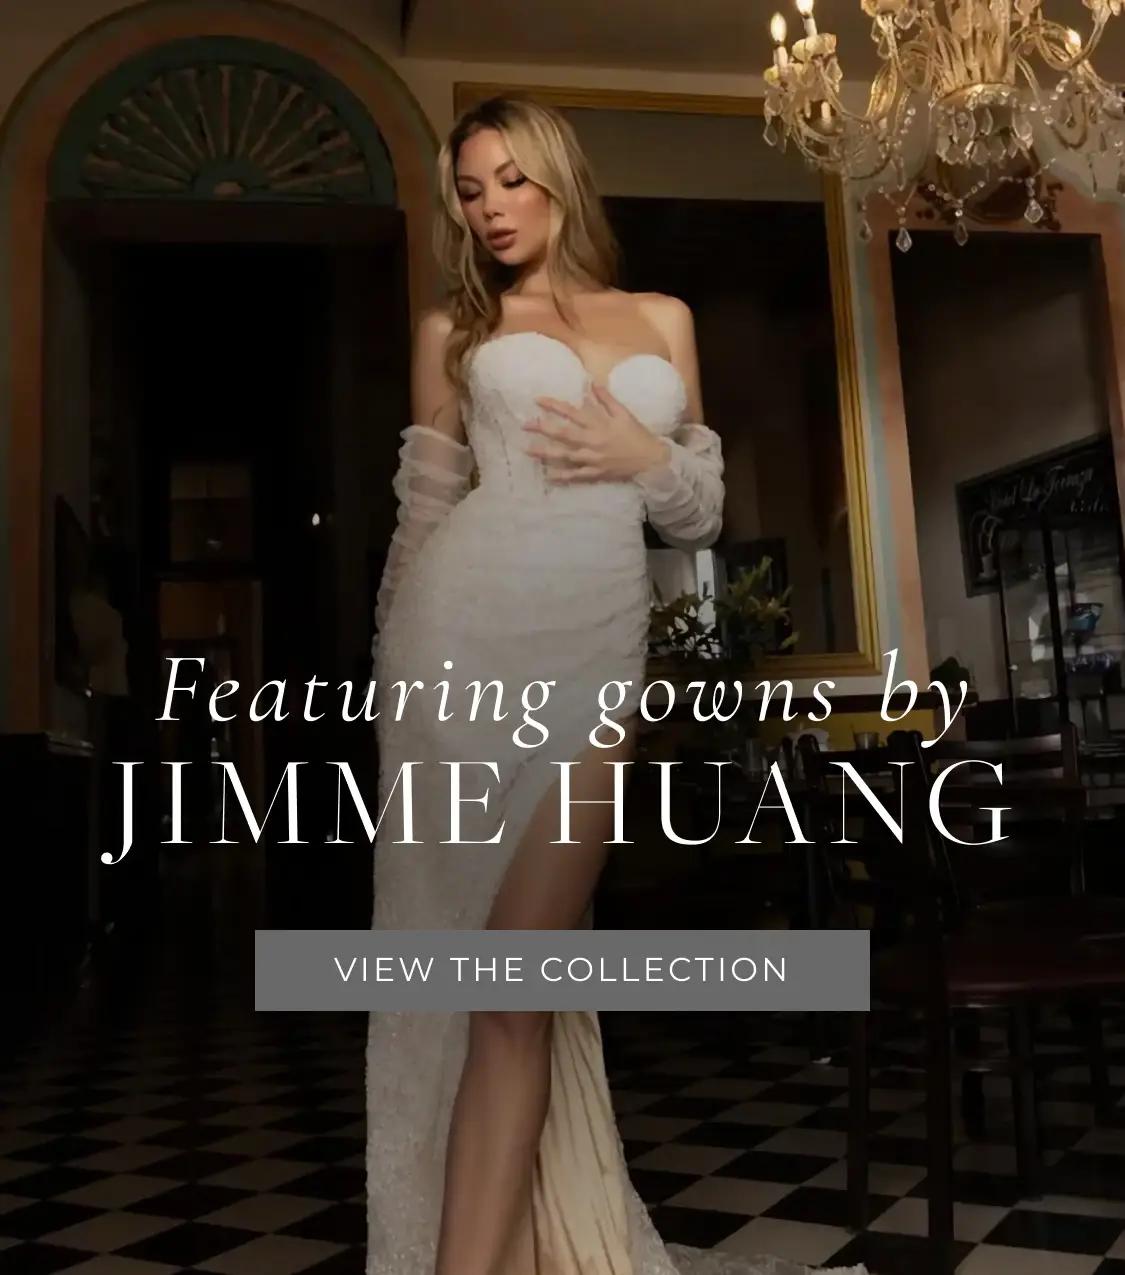 Featuring Gowns by Jimme Huang